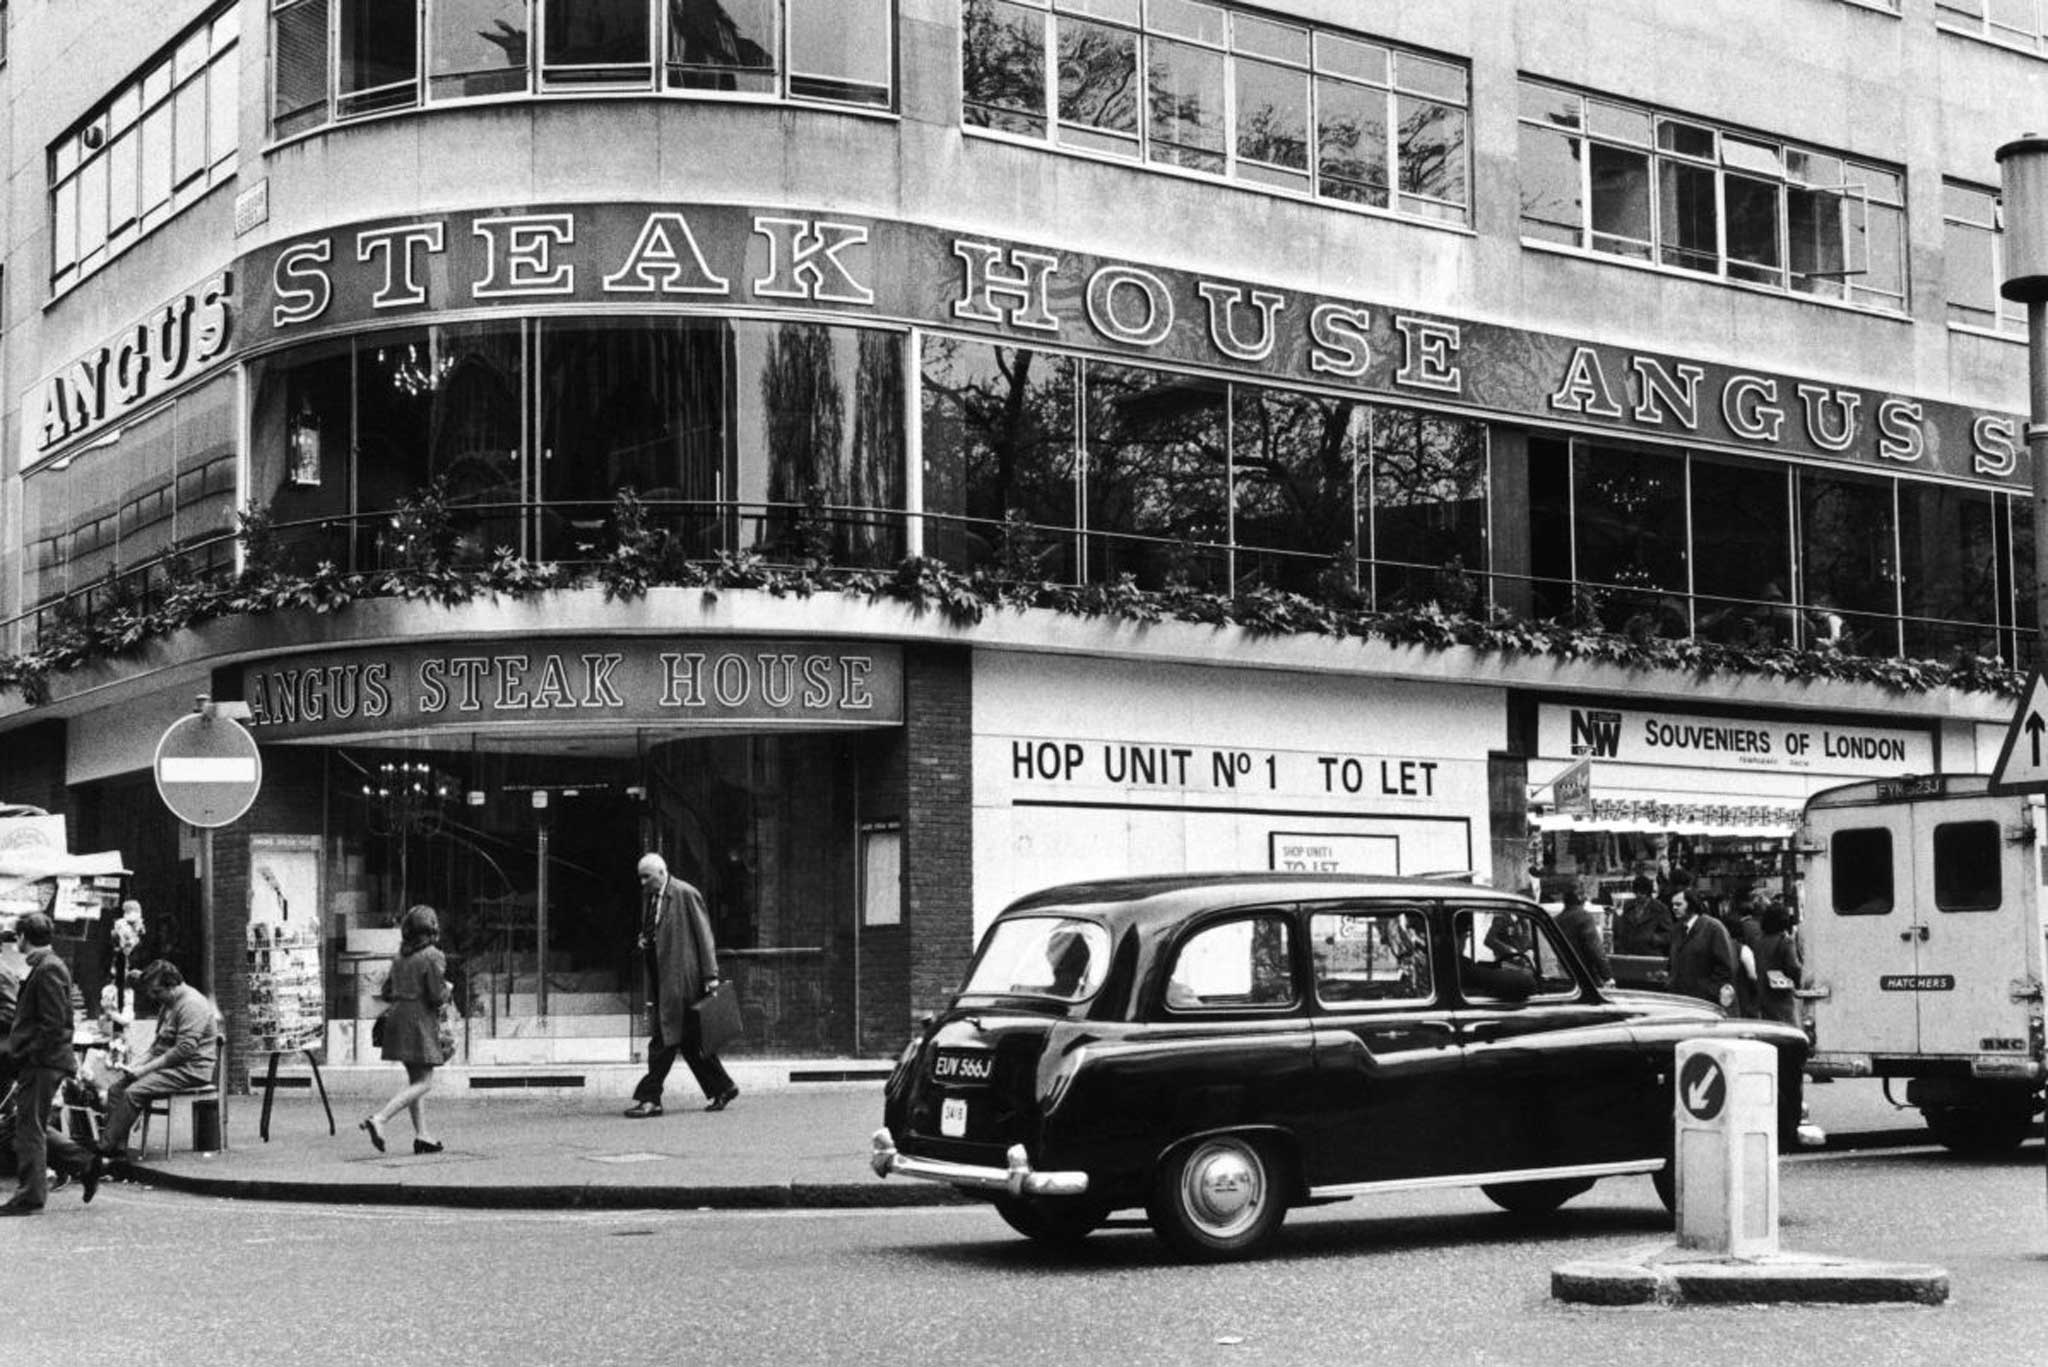 An Angus Steakhouse in Leicester Square, London in 1972